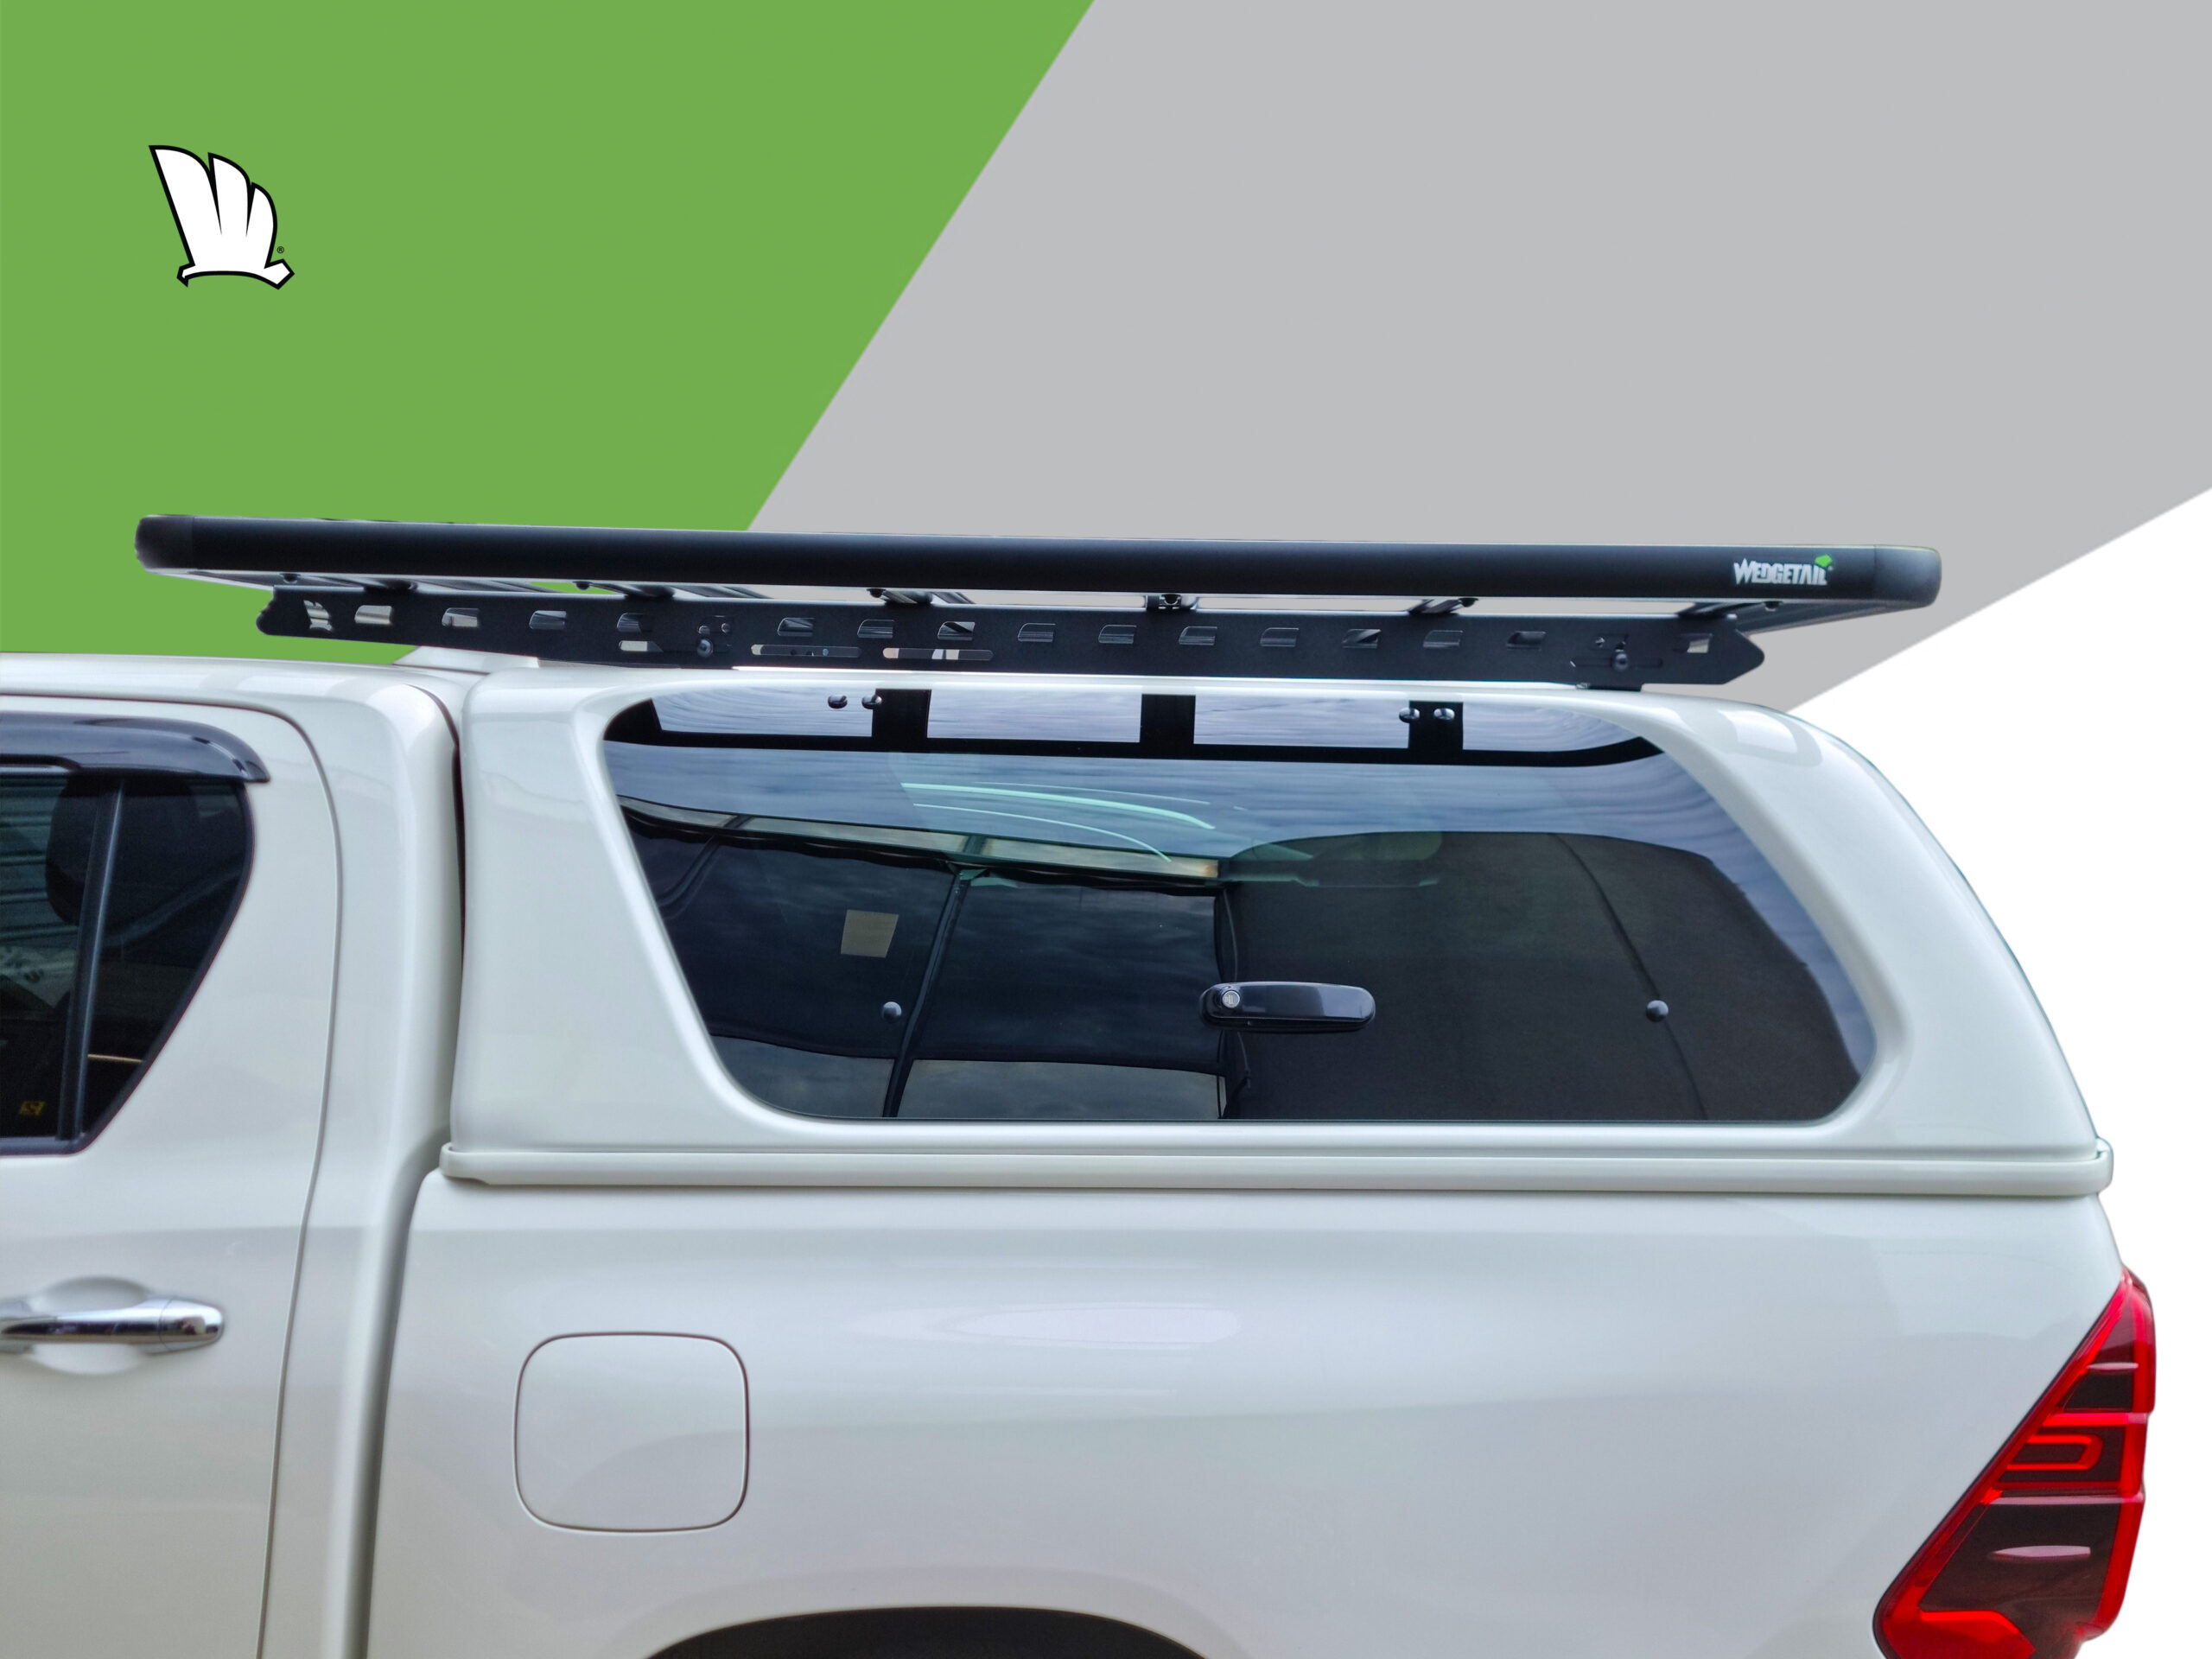 Side view of the Wedgetail rack on the cabin roof of the HiLux showing the one piece mounting rails with two connection points and the platform roof rack attached to the mounting rails at each of the five cross bars.